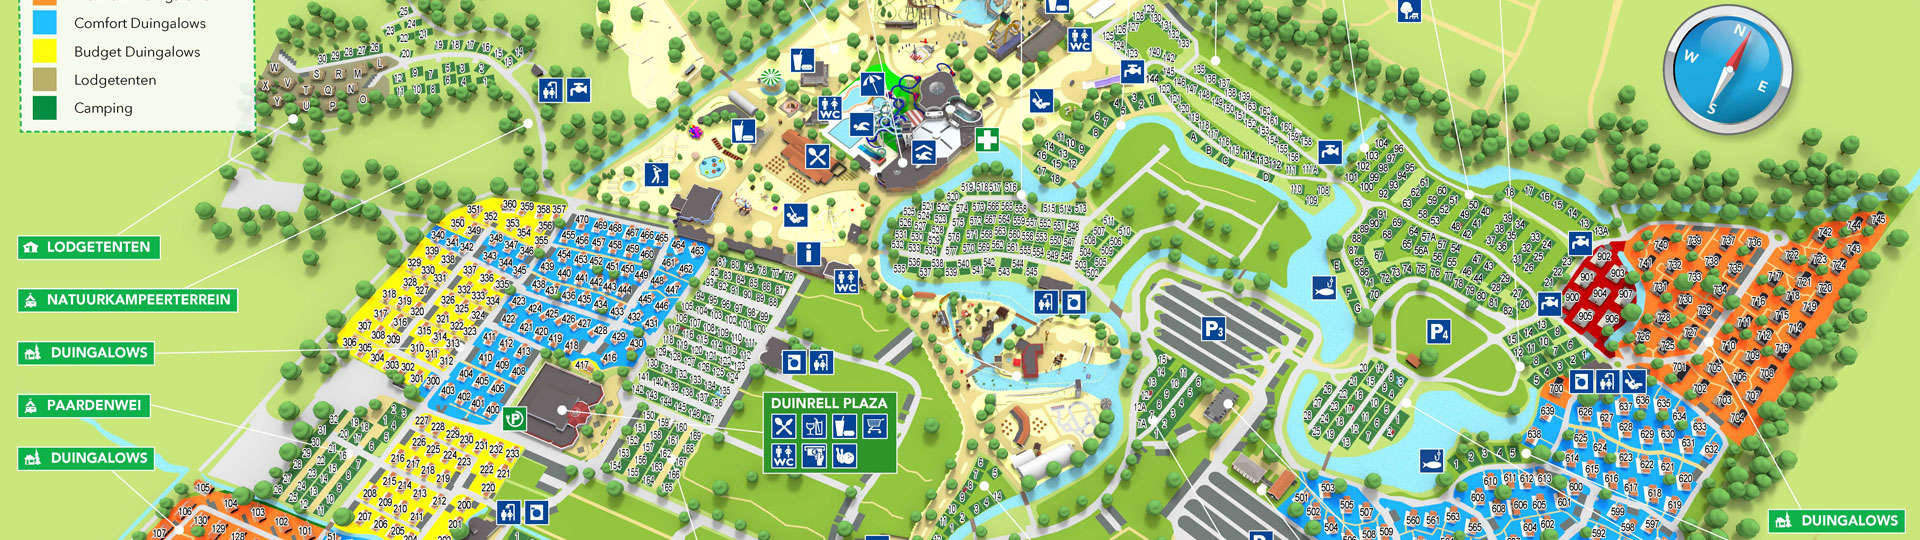 LOOK AT SANITARY BUILDINGS ON park MAP